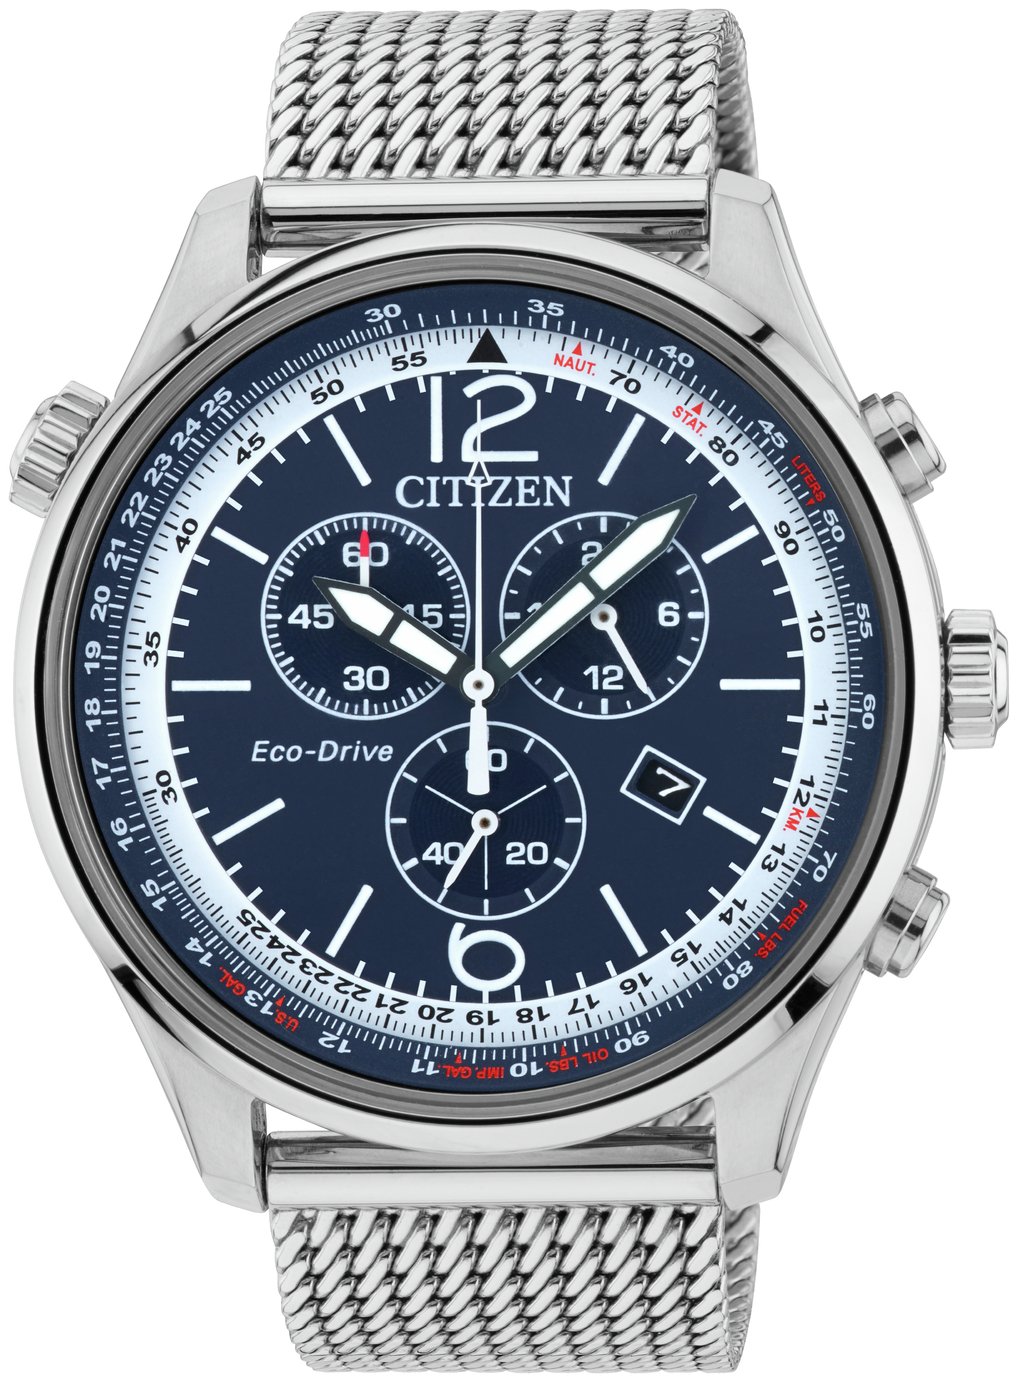 Citizen Eco-Drive Men's Stainless Steel Chronograph Watch (5385878 Stainless Steel Citizen Eco Drive Watch